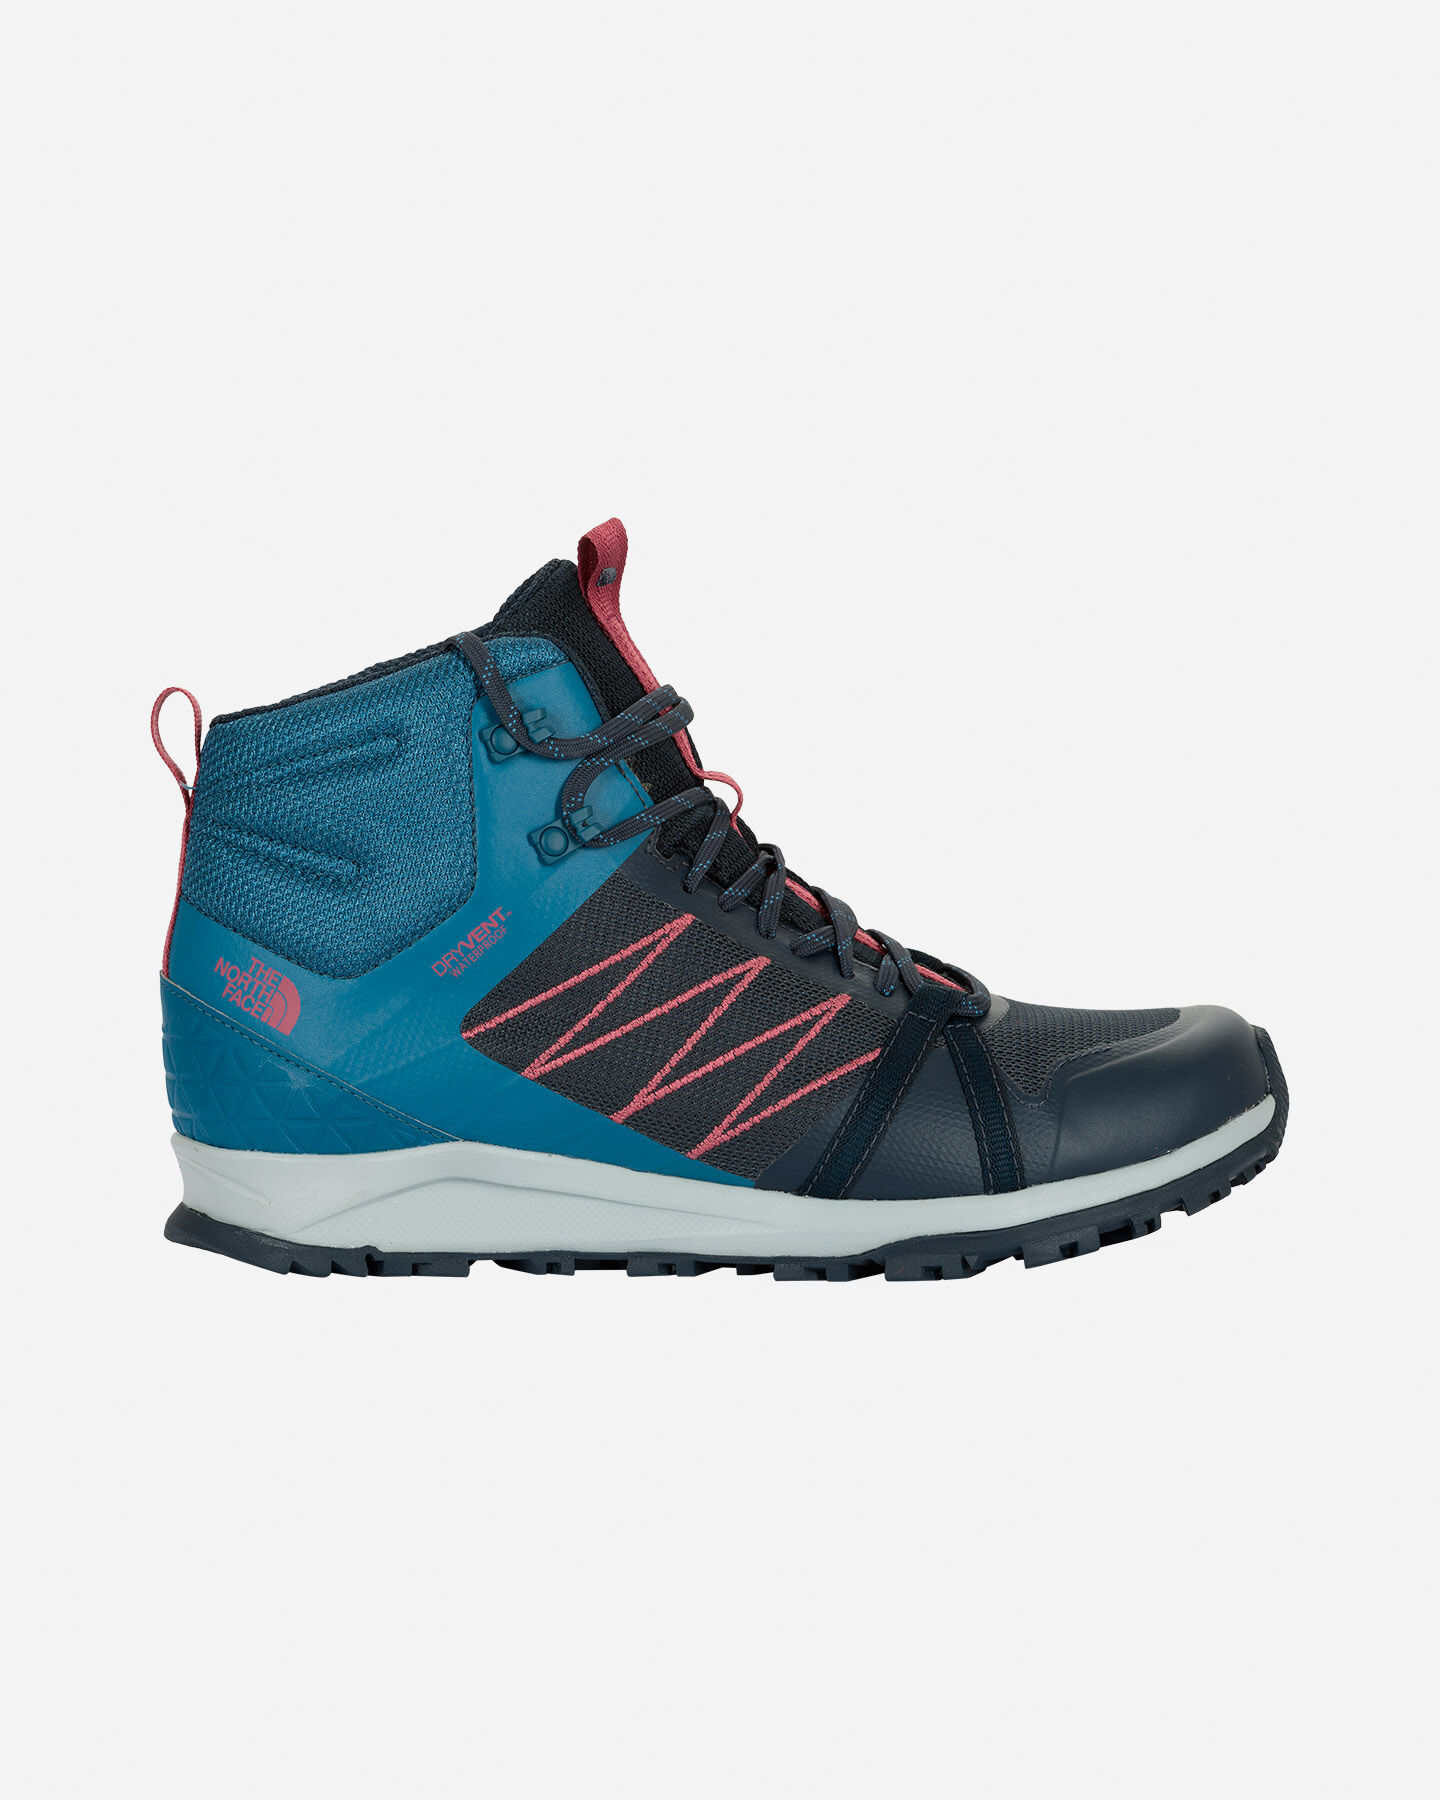  Scarpe escursionismo THE NORTH FACE LITEWAVE FASTPACK II MID WP W S5202767|N3S|5 scatto 0